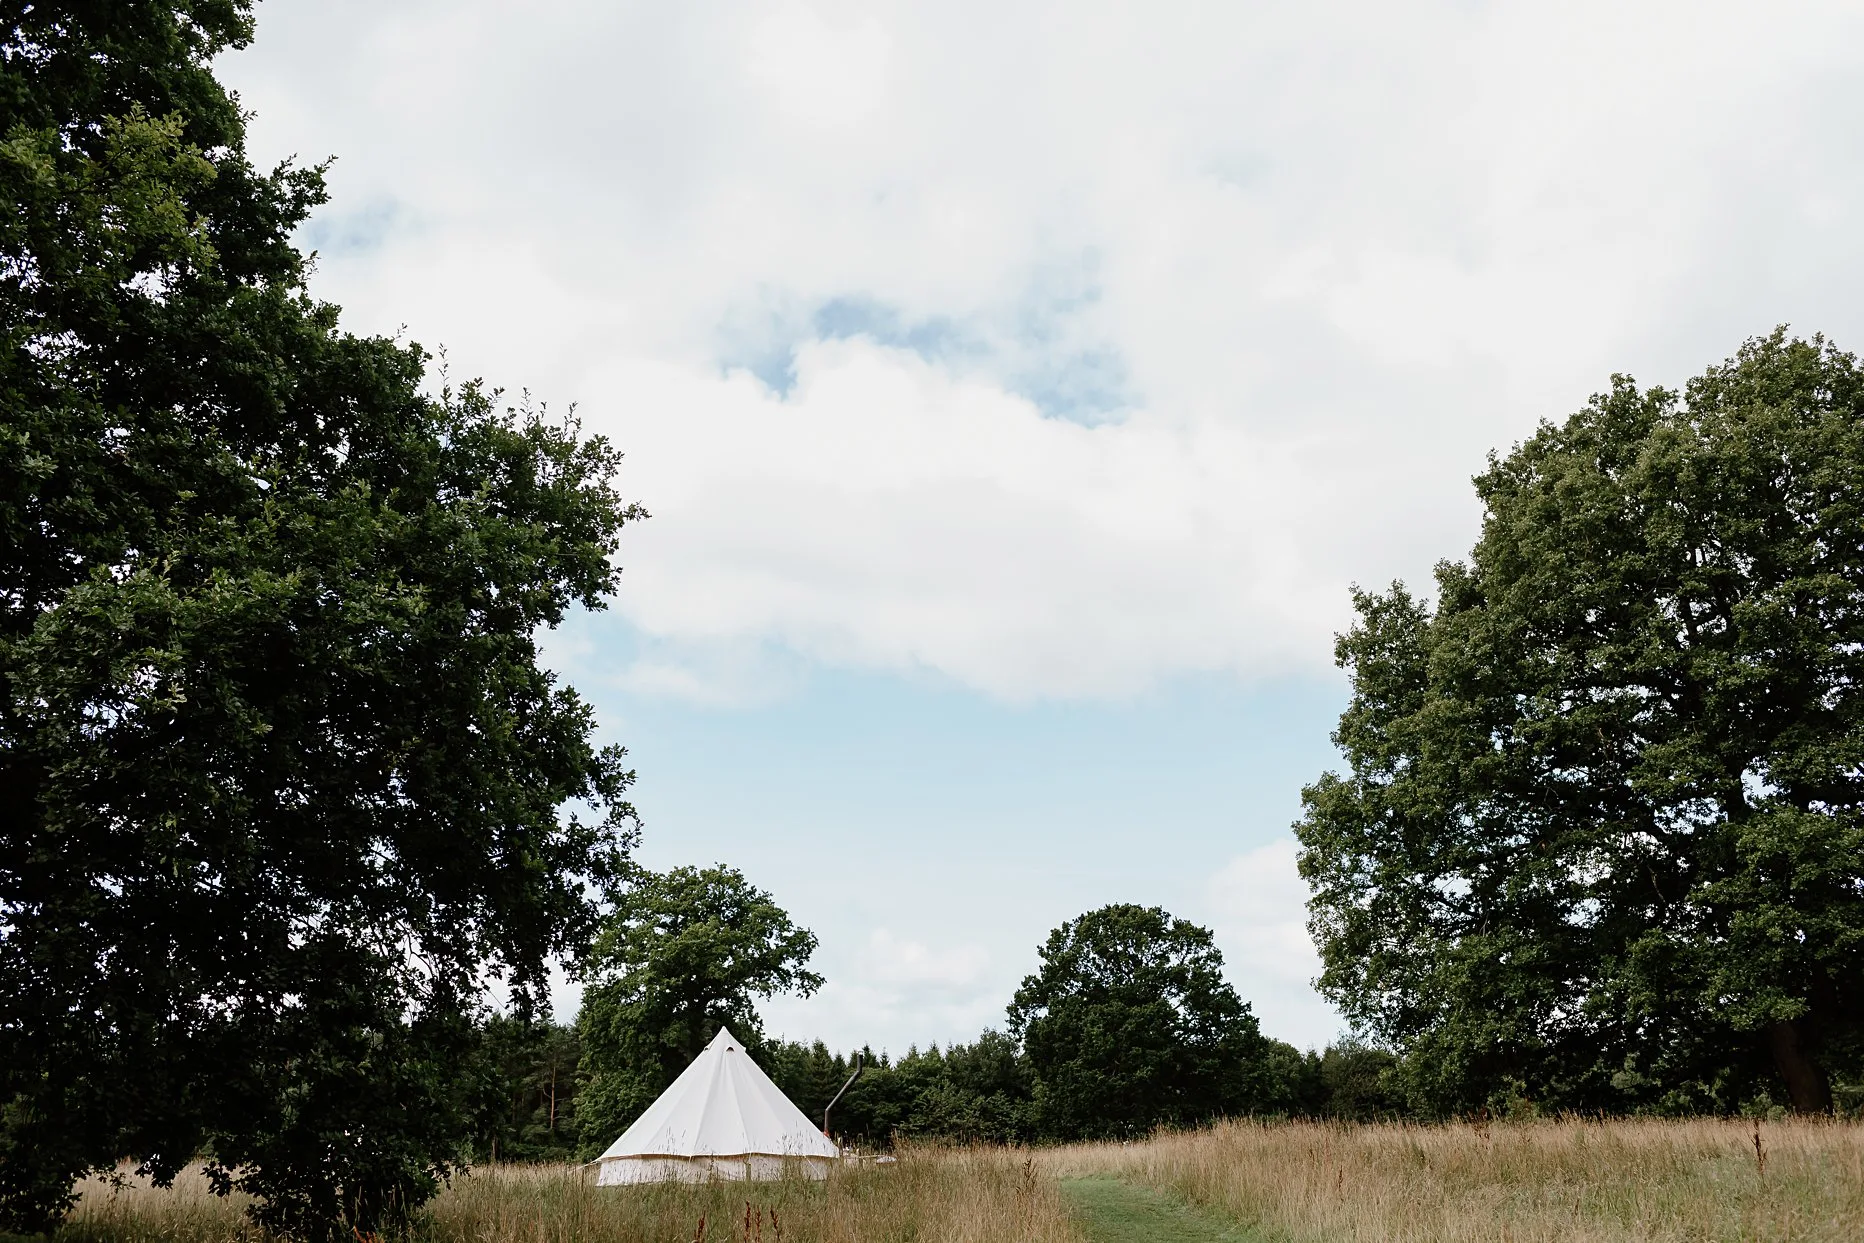 Glamping pod at Camp Katur in the middle of a field.